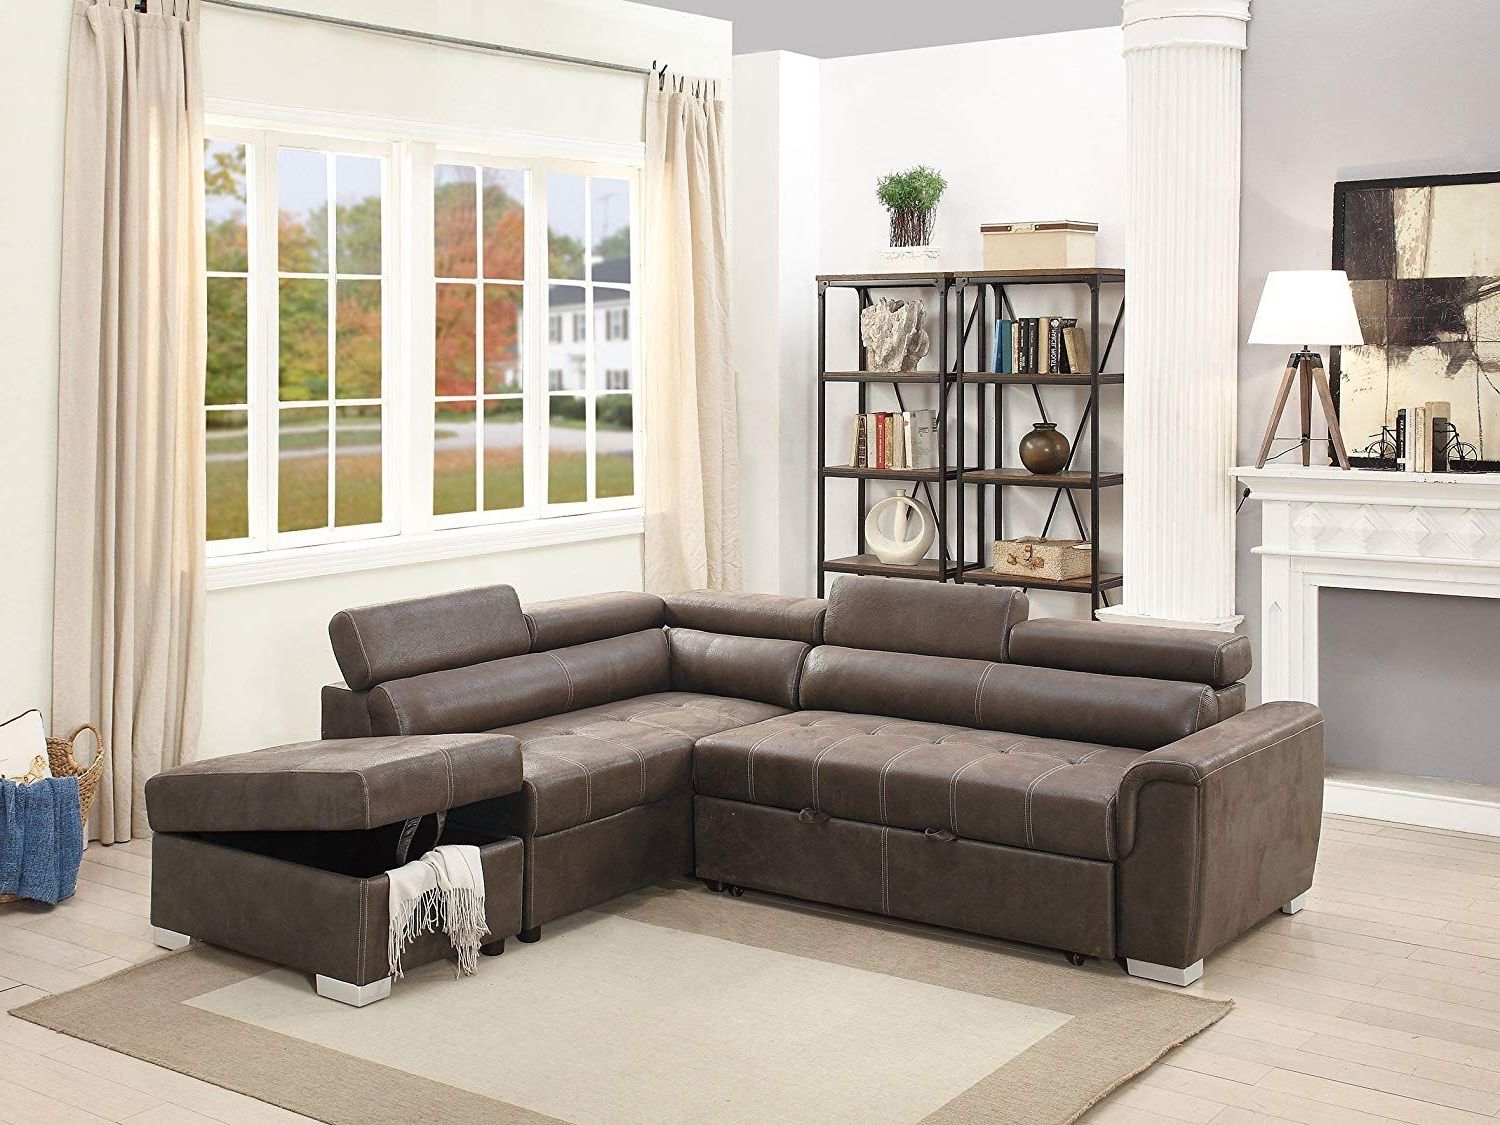 Fashionable Palisades Reclining Sectional Sofas With Left Storage Chaise For 8 Beautiful Left Chaise Sectional With Storage In The (View 21 of 25)